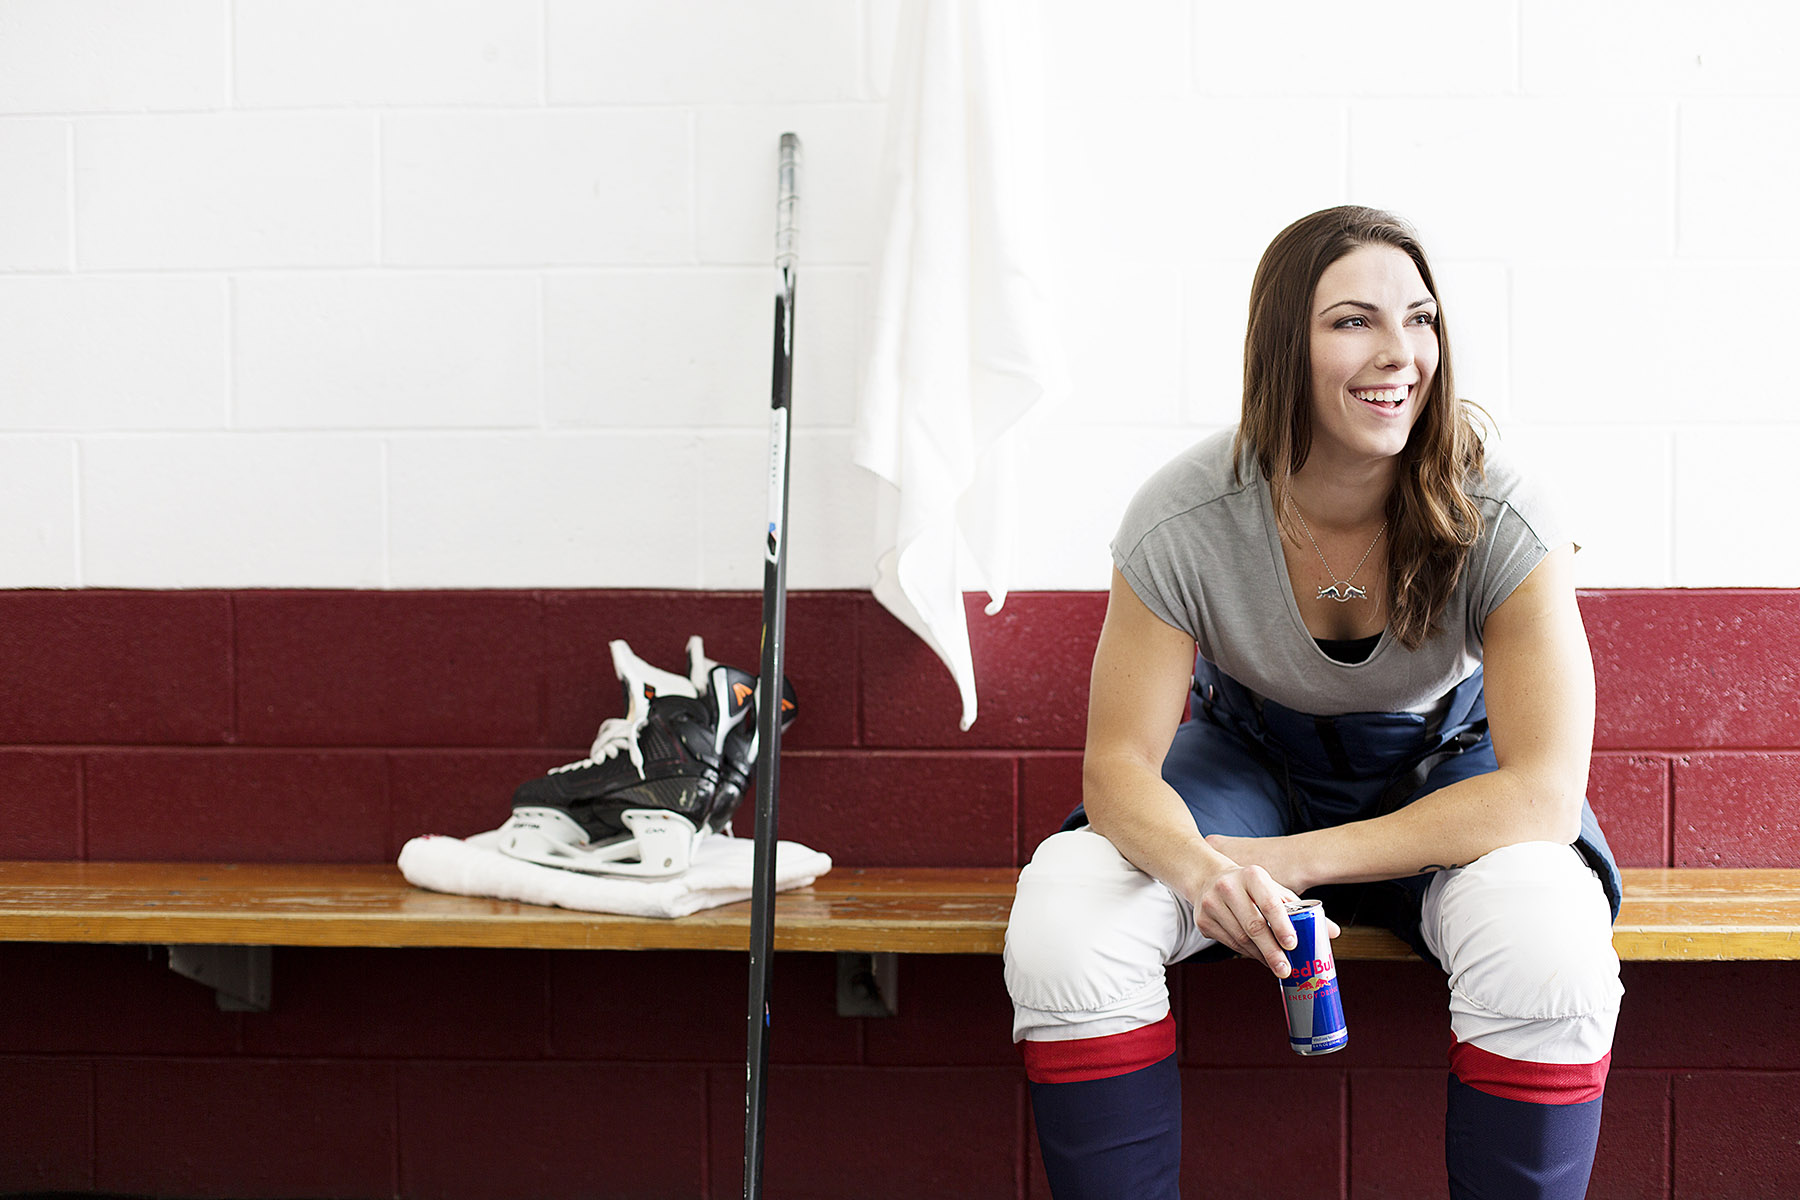 Hilary Knight for Red Bull by Boston based commercial lifestyle photographer Brian Nevins